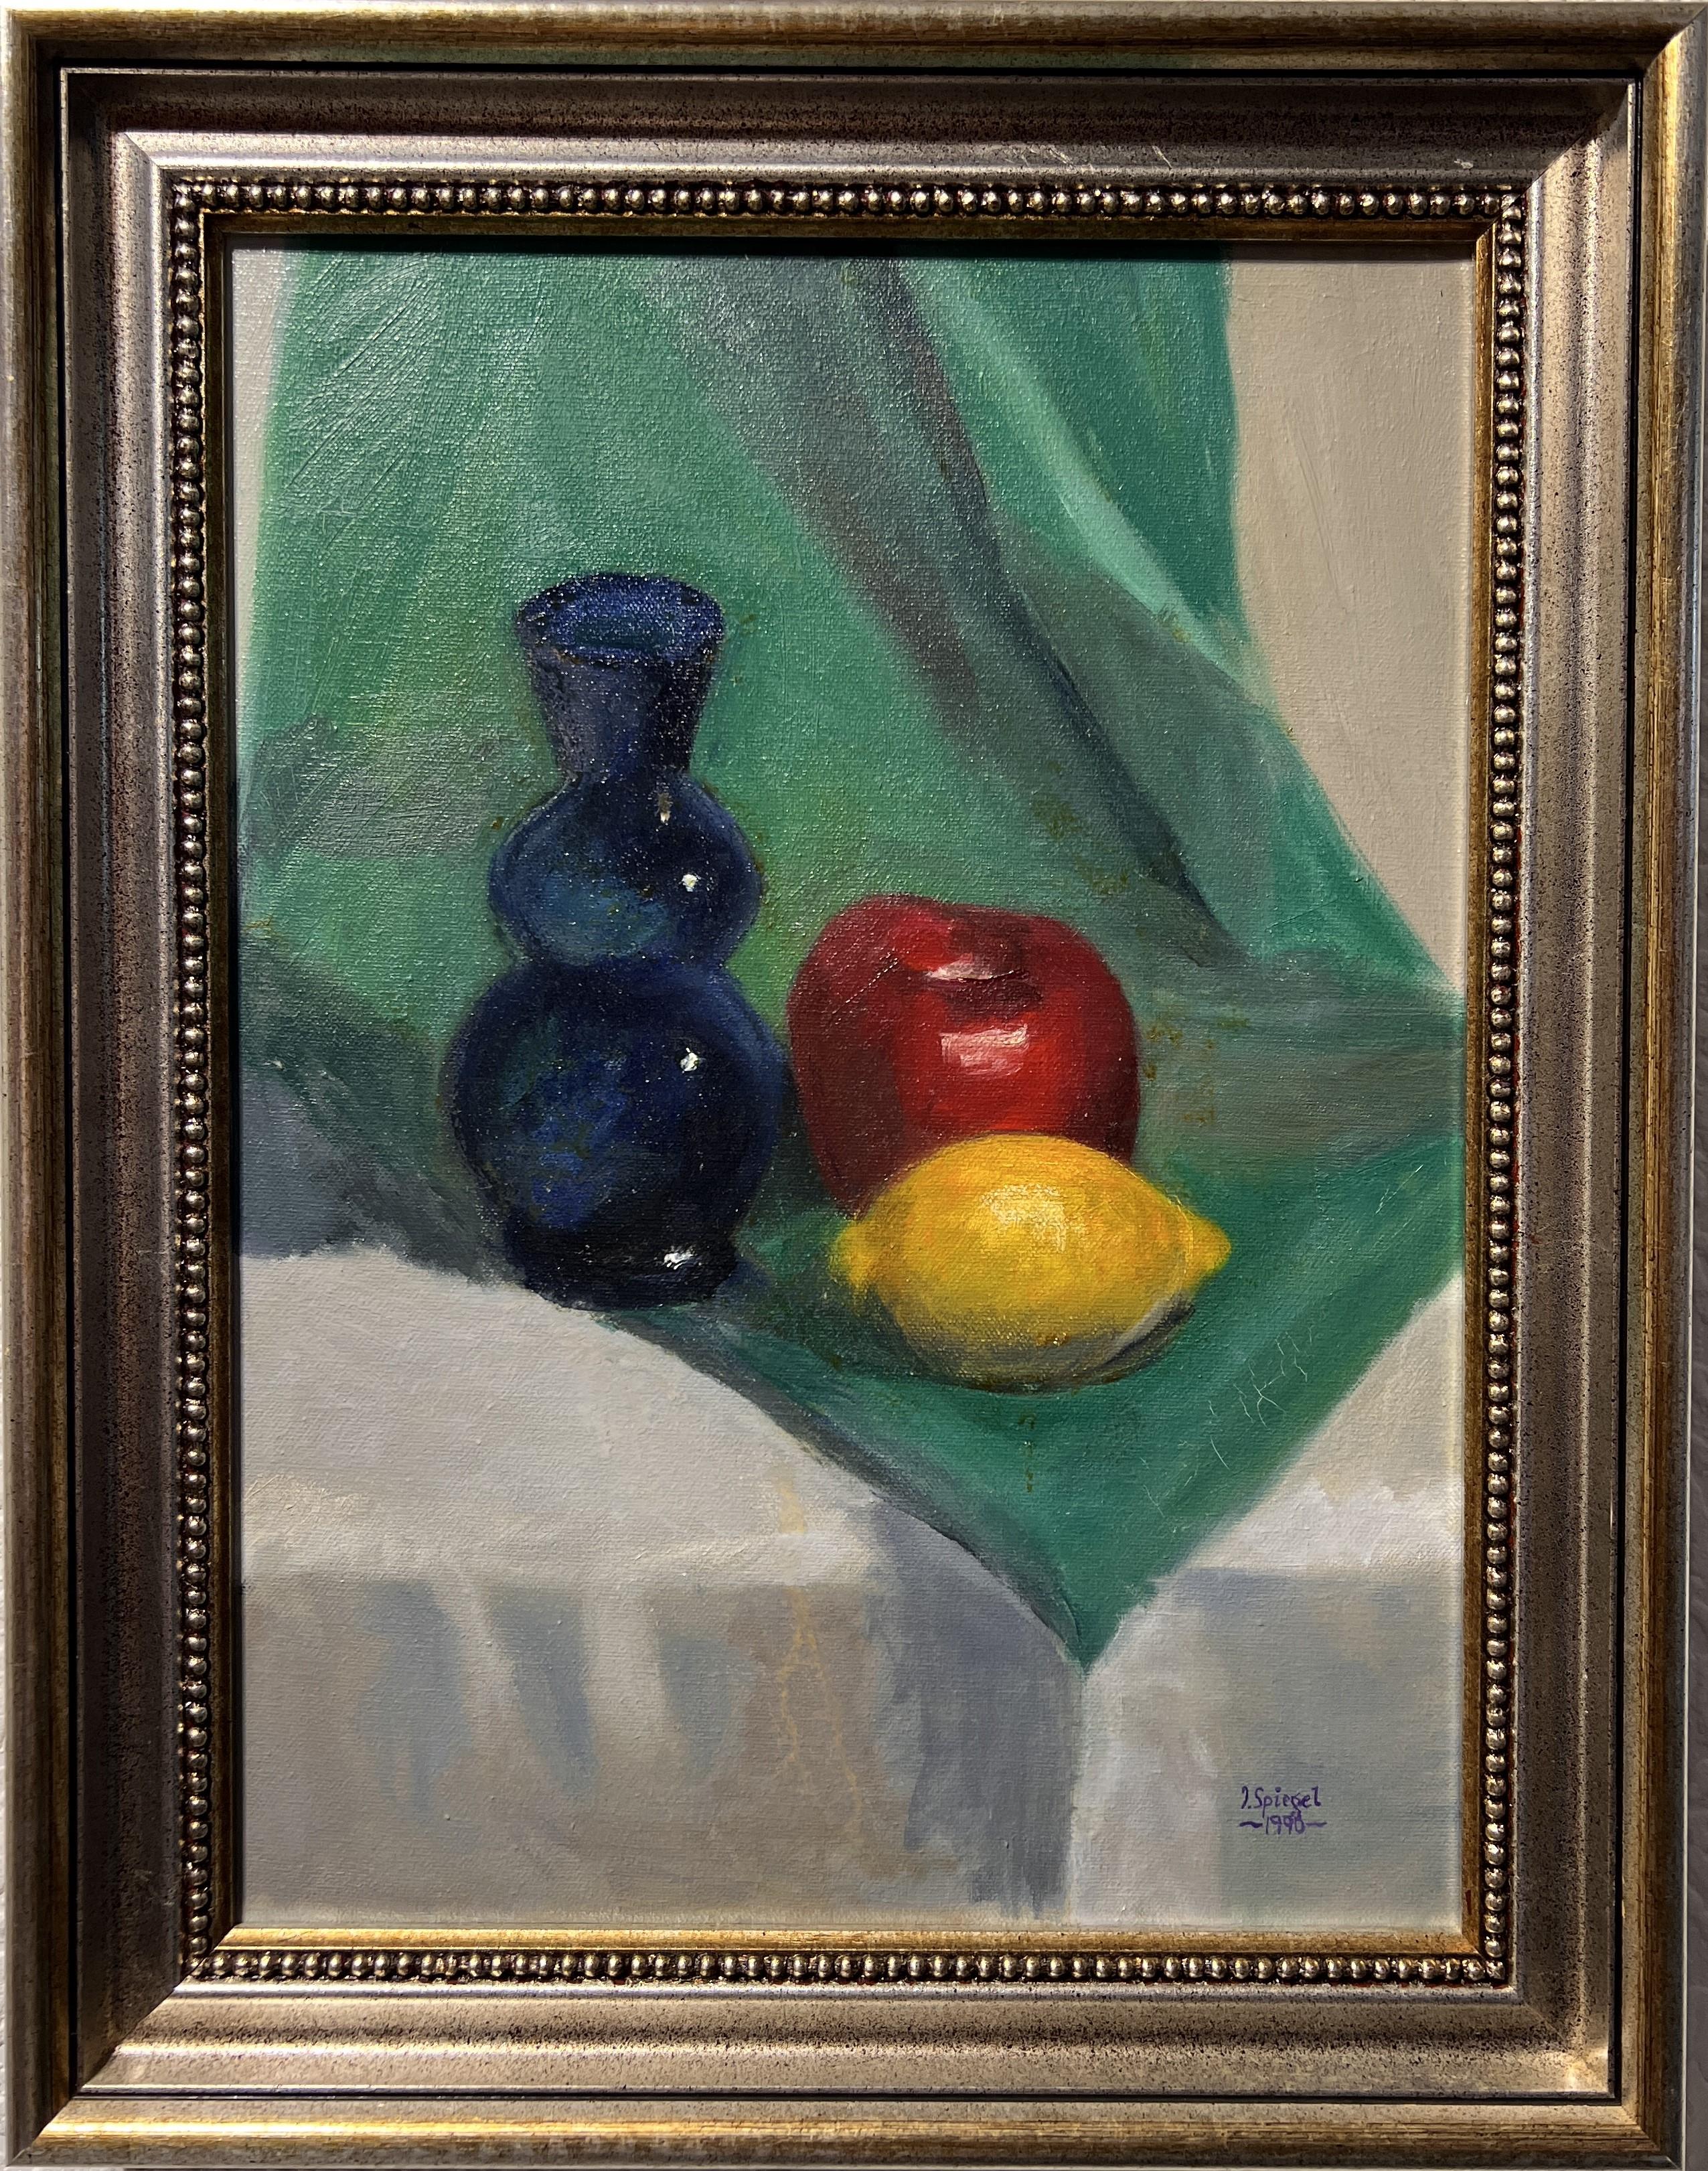 Up for sale is a vintage original oil painting on canvas depicting Still Life Composition with fruits, and a blue vase. 

Overall an impressive-looking medium-sized painting that will easily breathe life and color into any room, especially to a